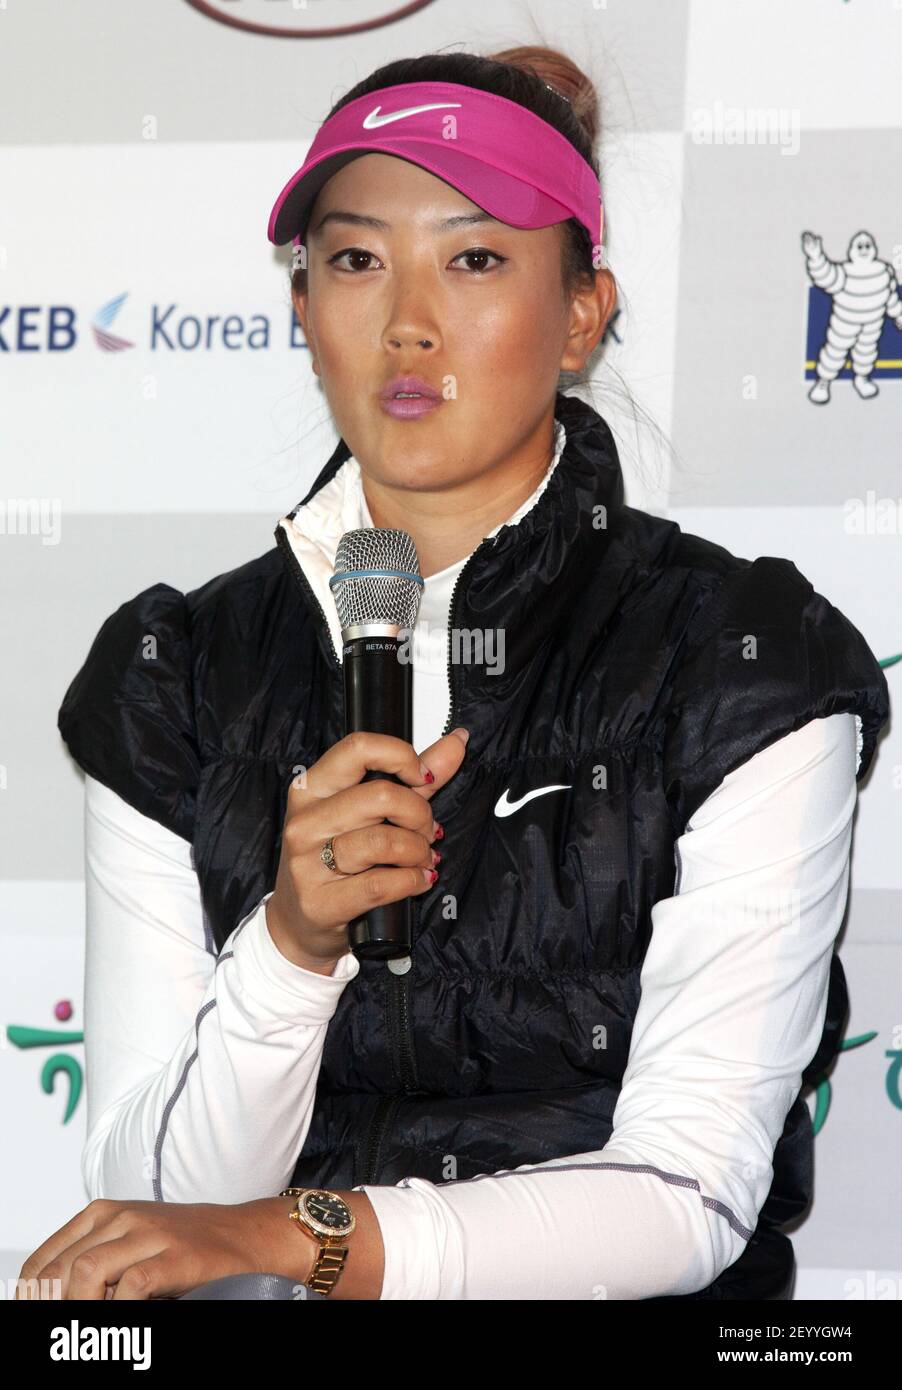 15 October 2012 - Incheon, South Korea : LPGA golf player American Michelle  Wie, attends a press conference for the LPGA KEB-Hana Bank Championship  2012 golf tournament at Sky72 Golf Club Ocean